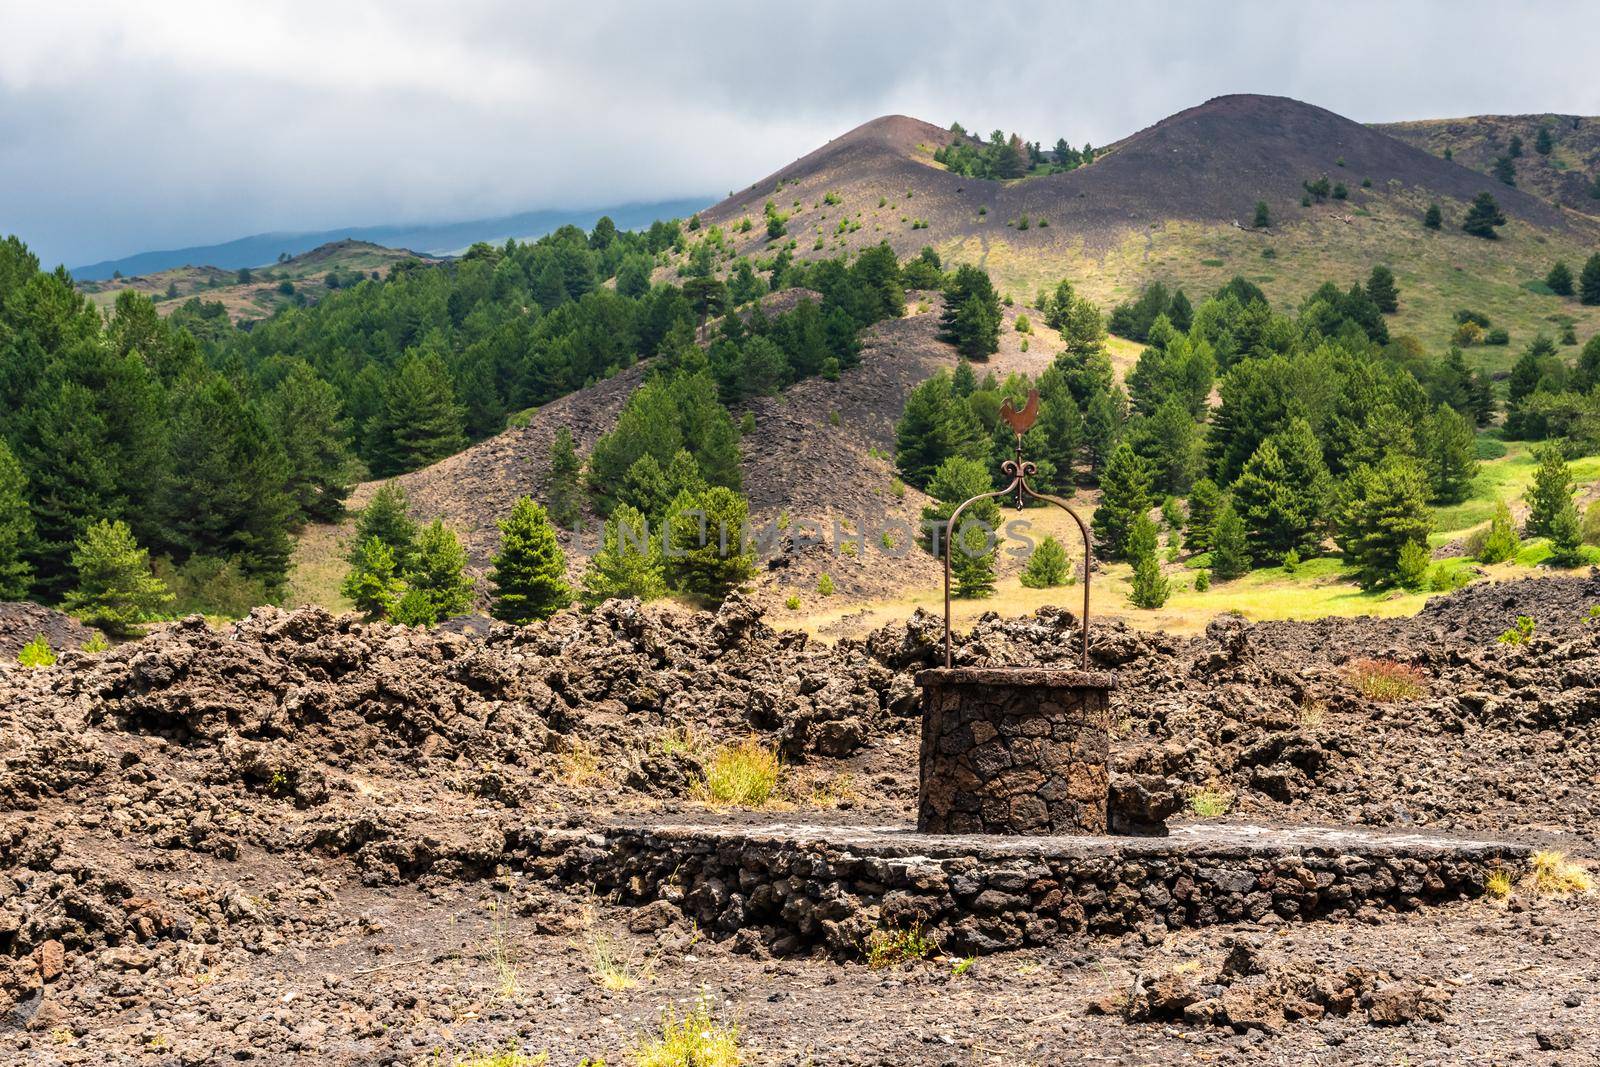 Santa Barbara refuge on Mount Etna and the lava stone well, Sicily by mauricallari